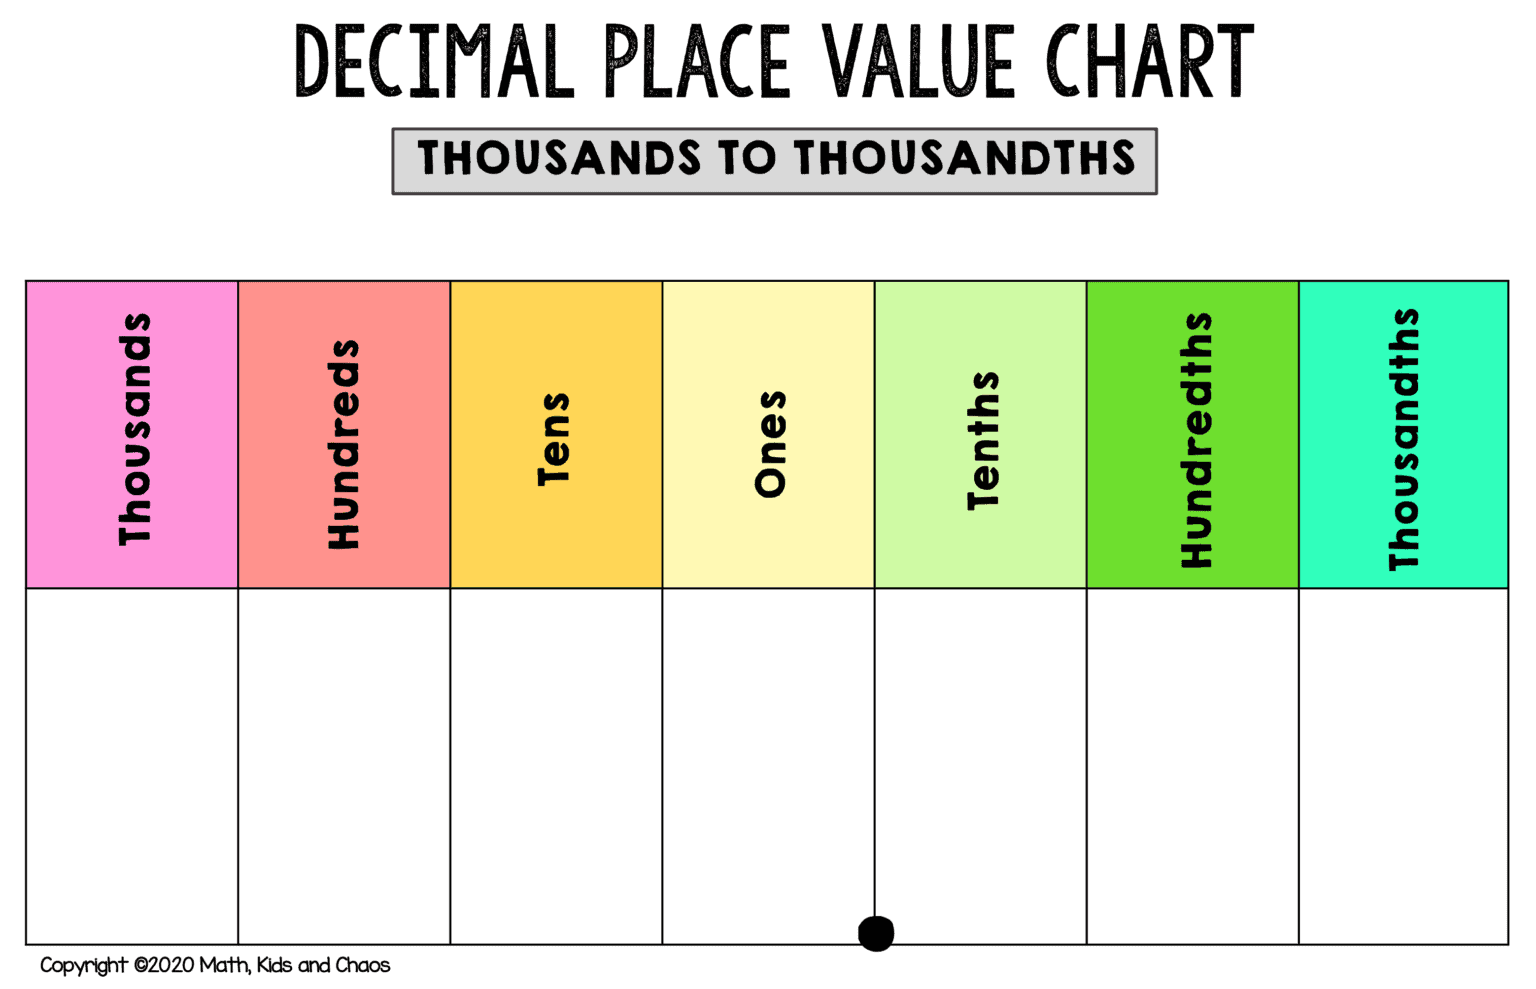 whole-numbers-place-value-chart-names-and-periods-explanation